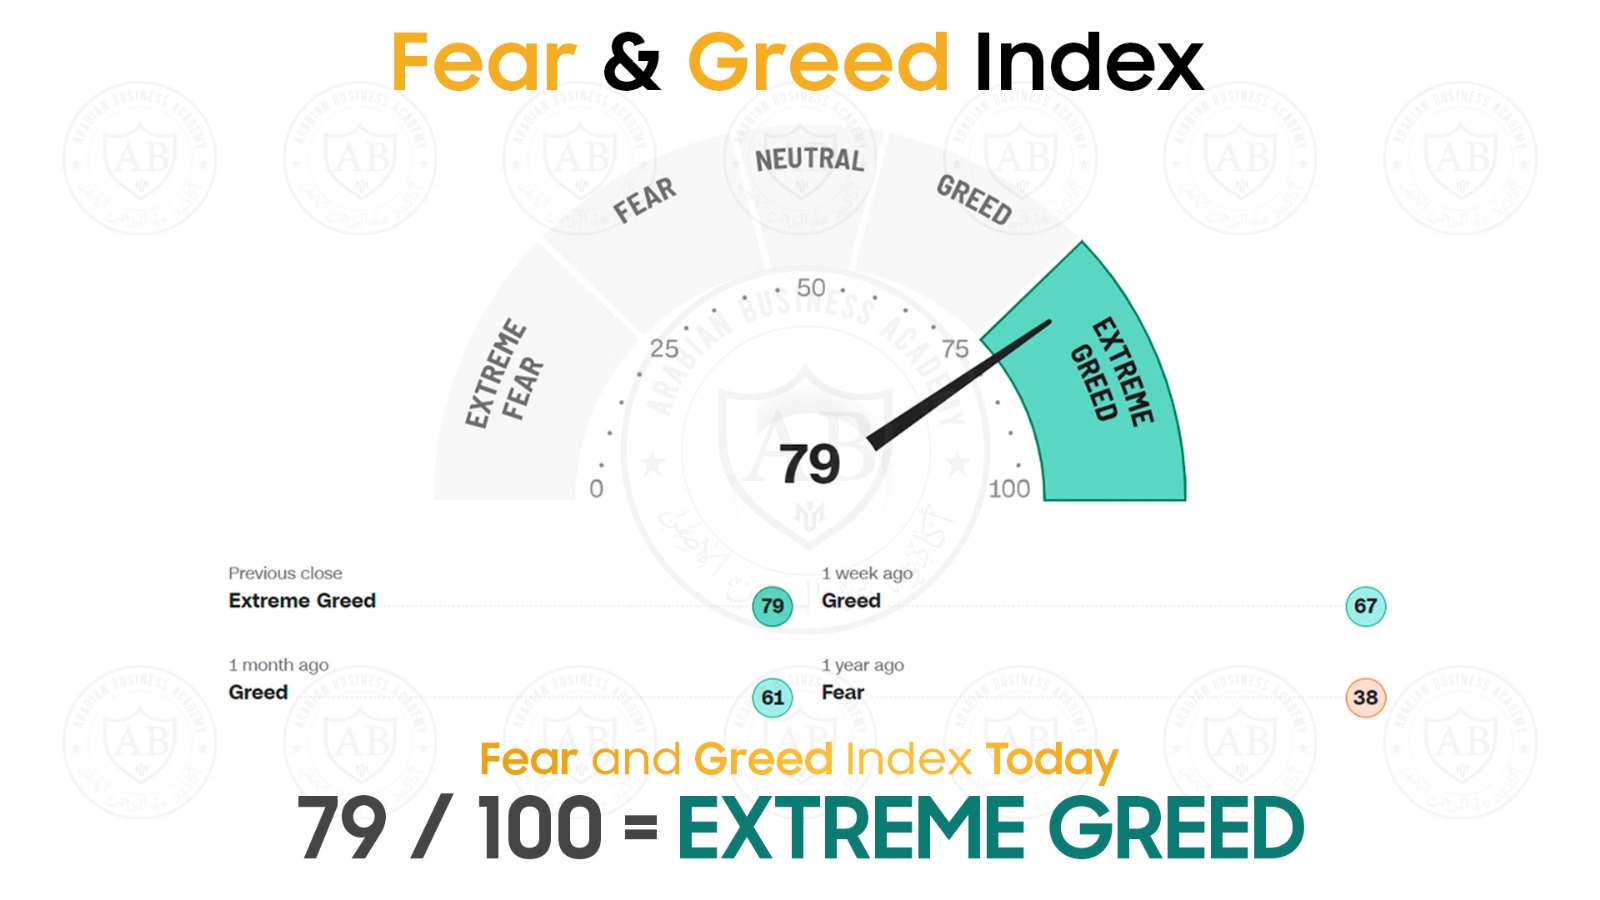 feer and greed index 79/100